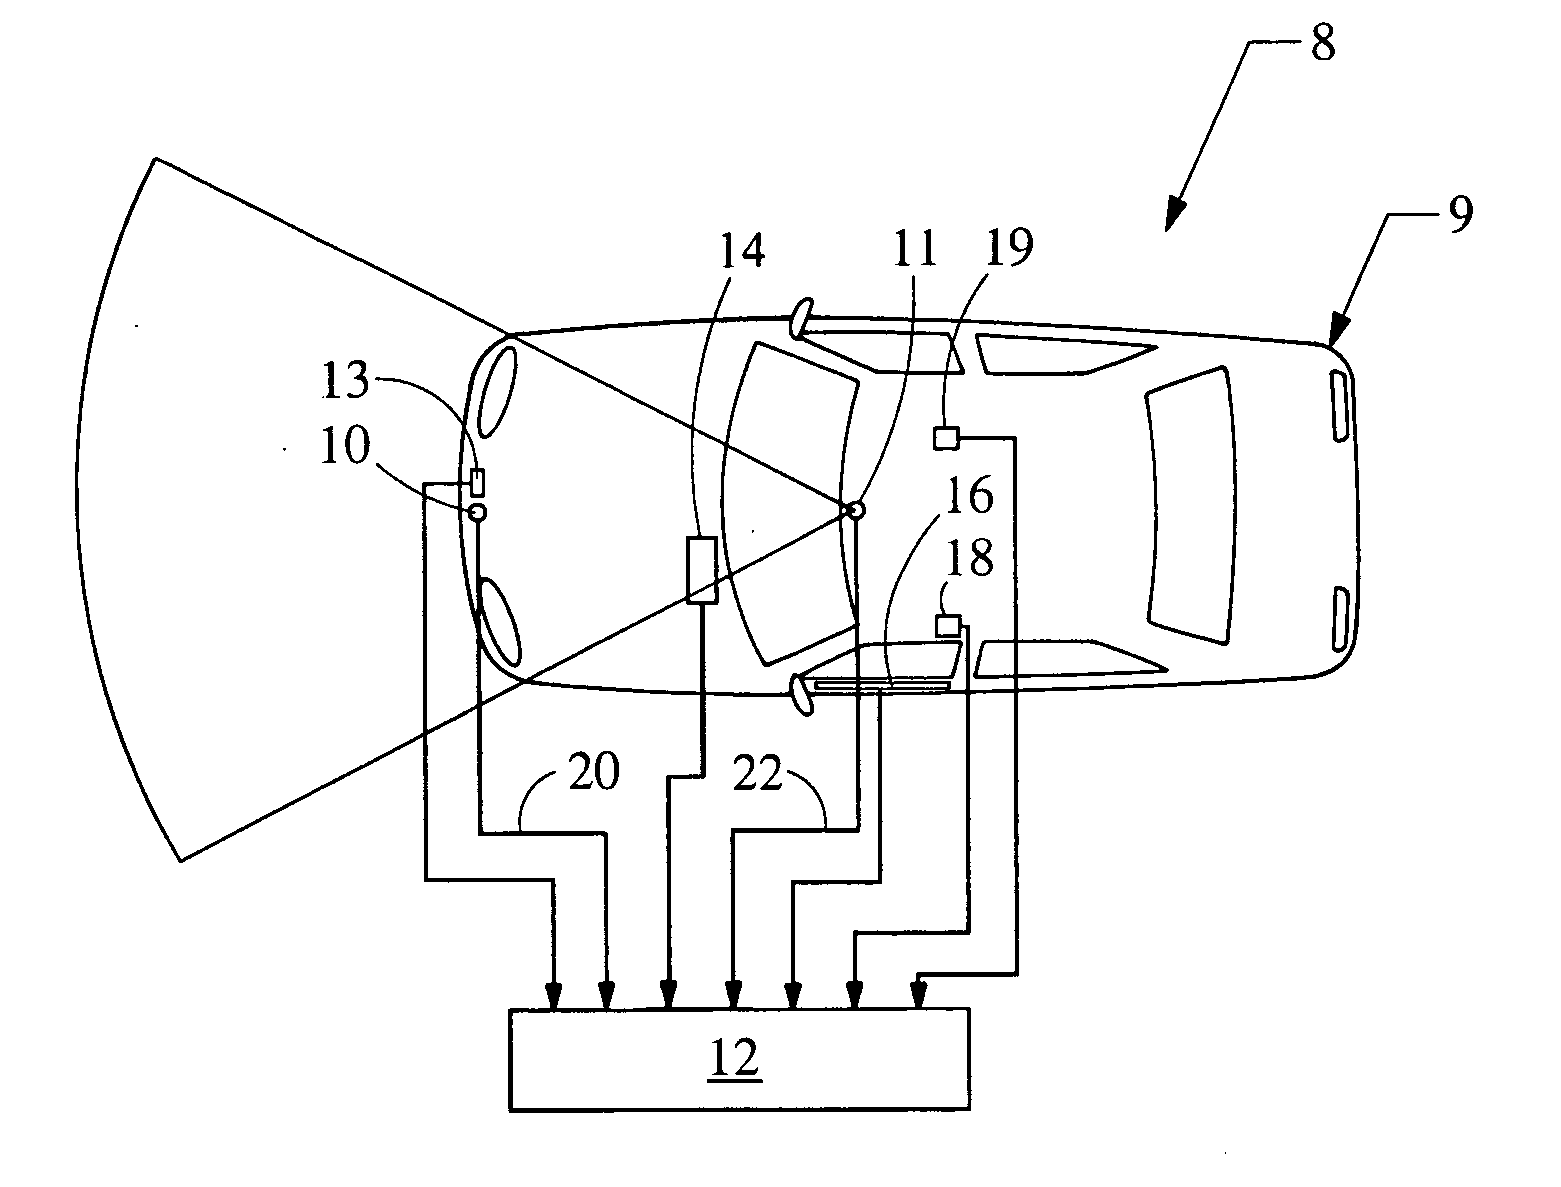 System for sensing impending collision and adjusting deployment of safety device